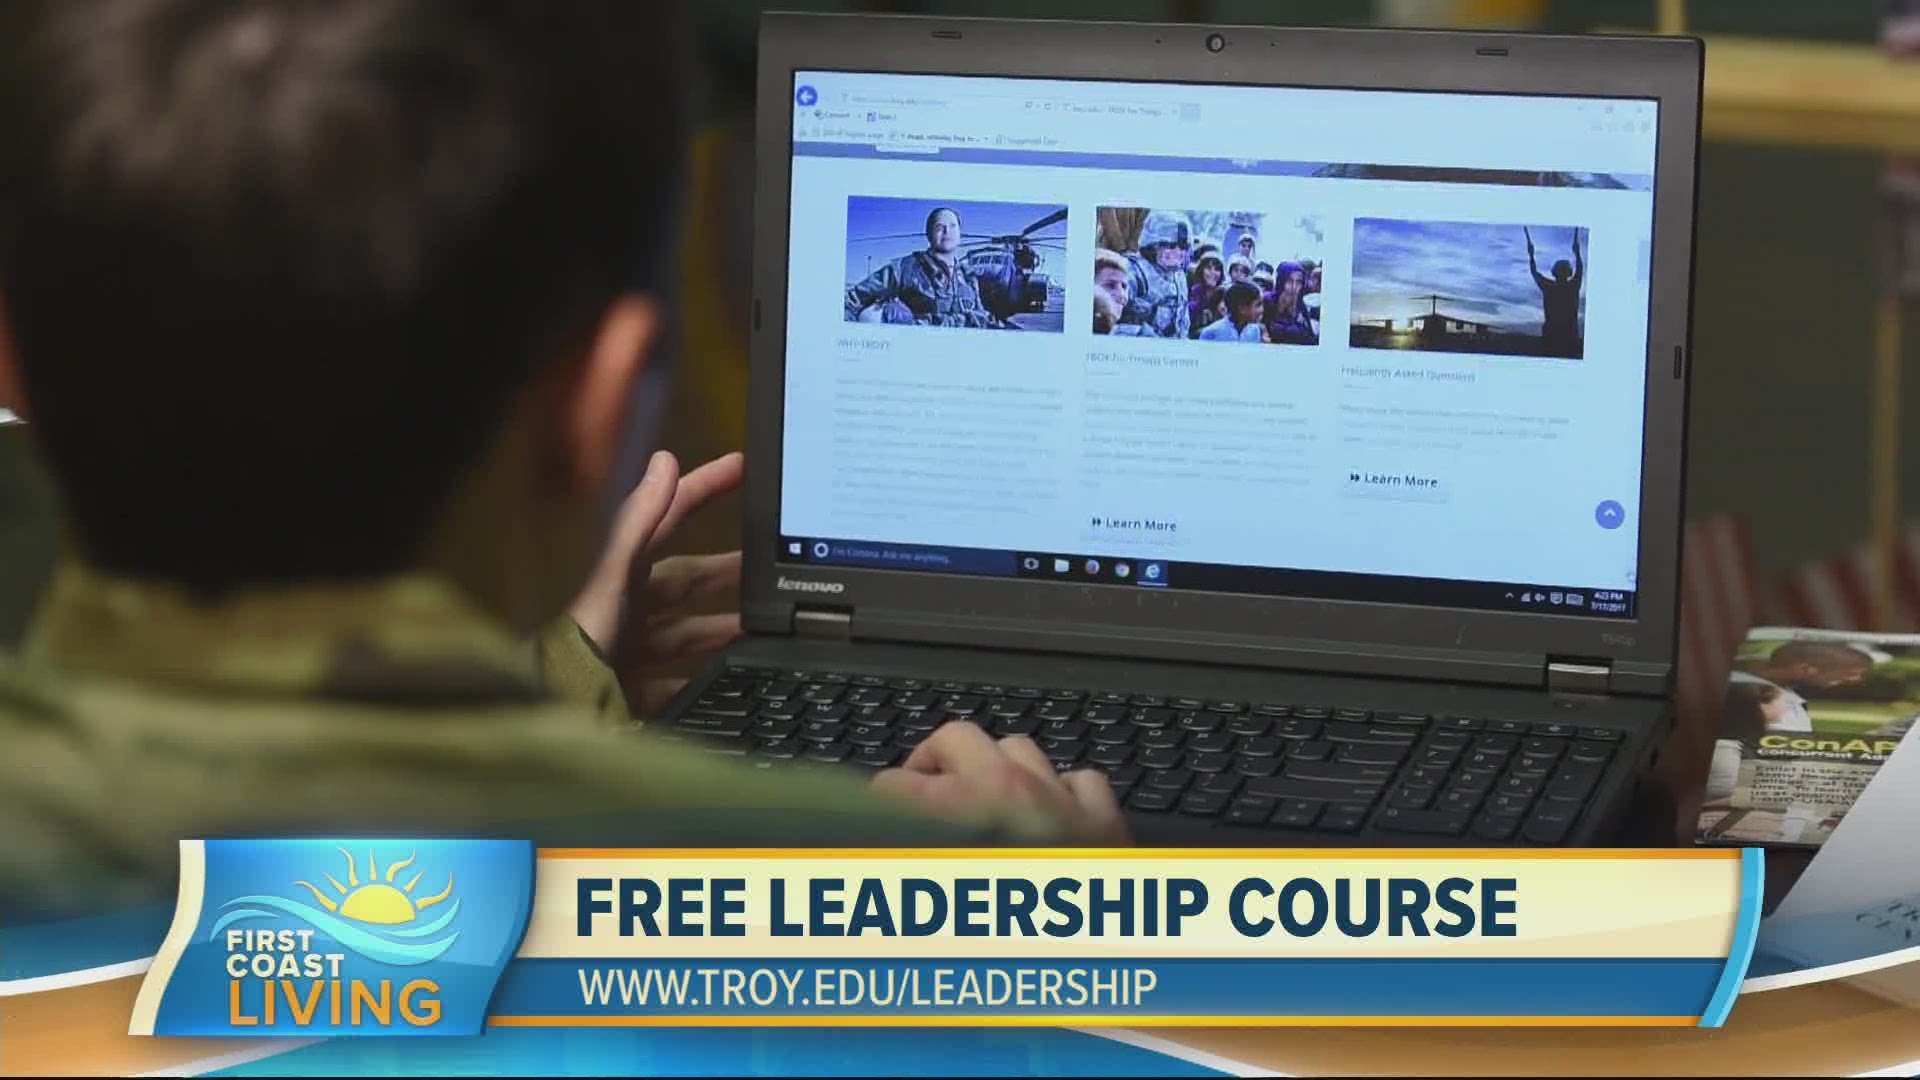 Troy University offers a free leadership course to introduce them to online learning and more!